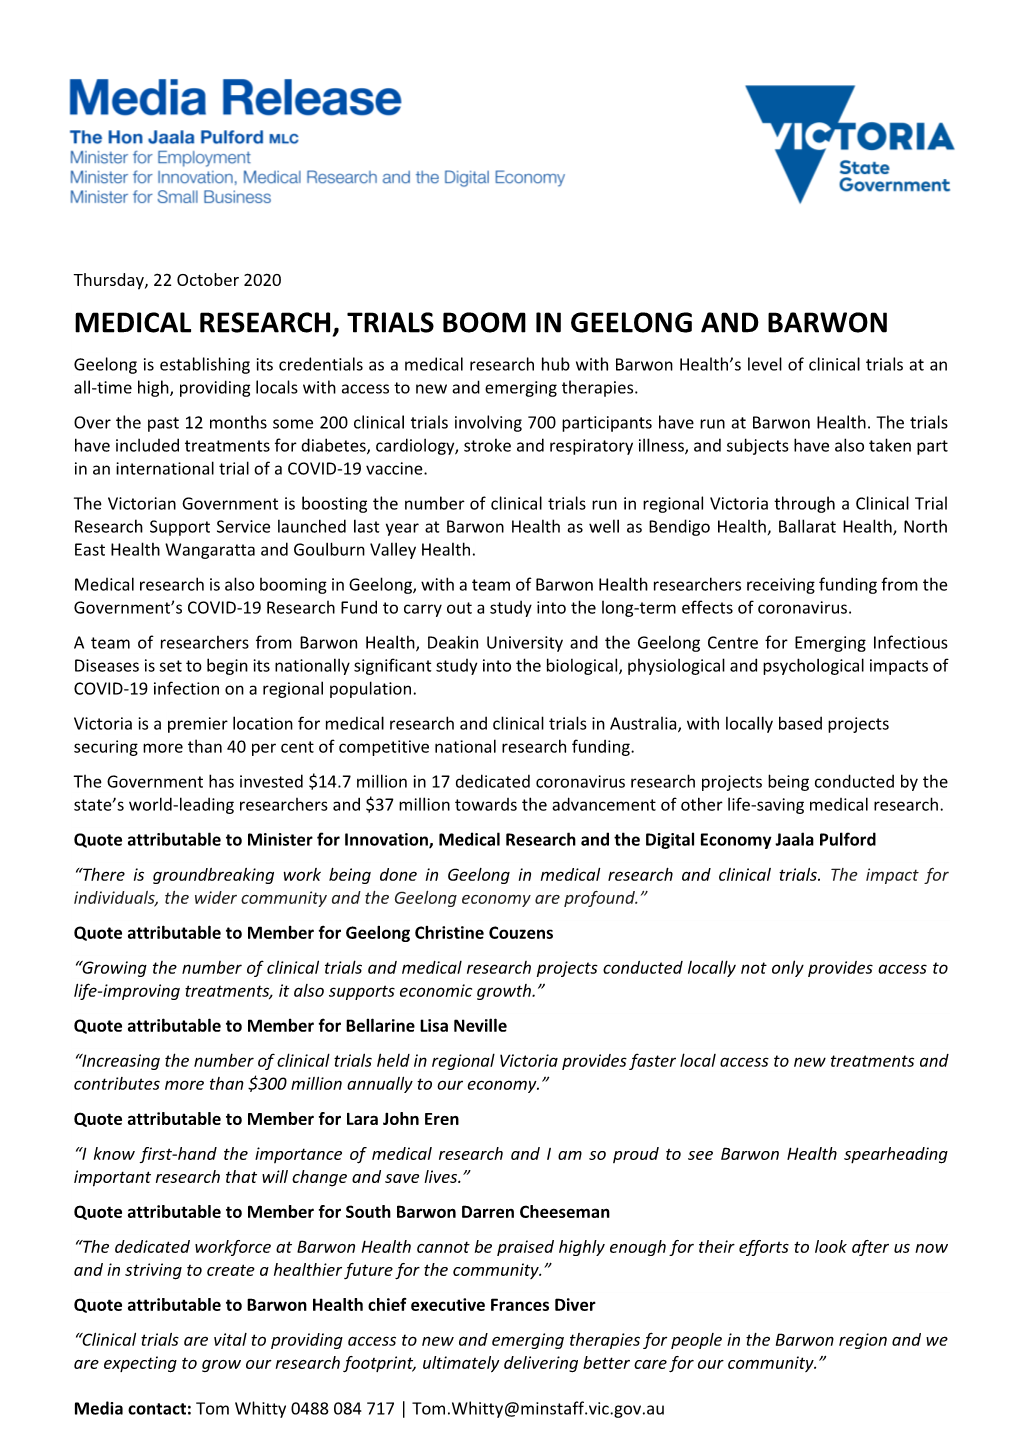 Medical Research, Trials Boom in Geelong and Barwon